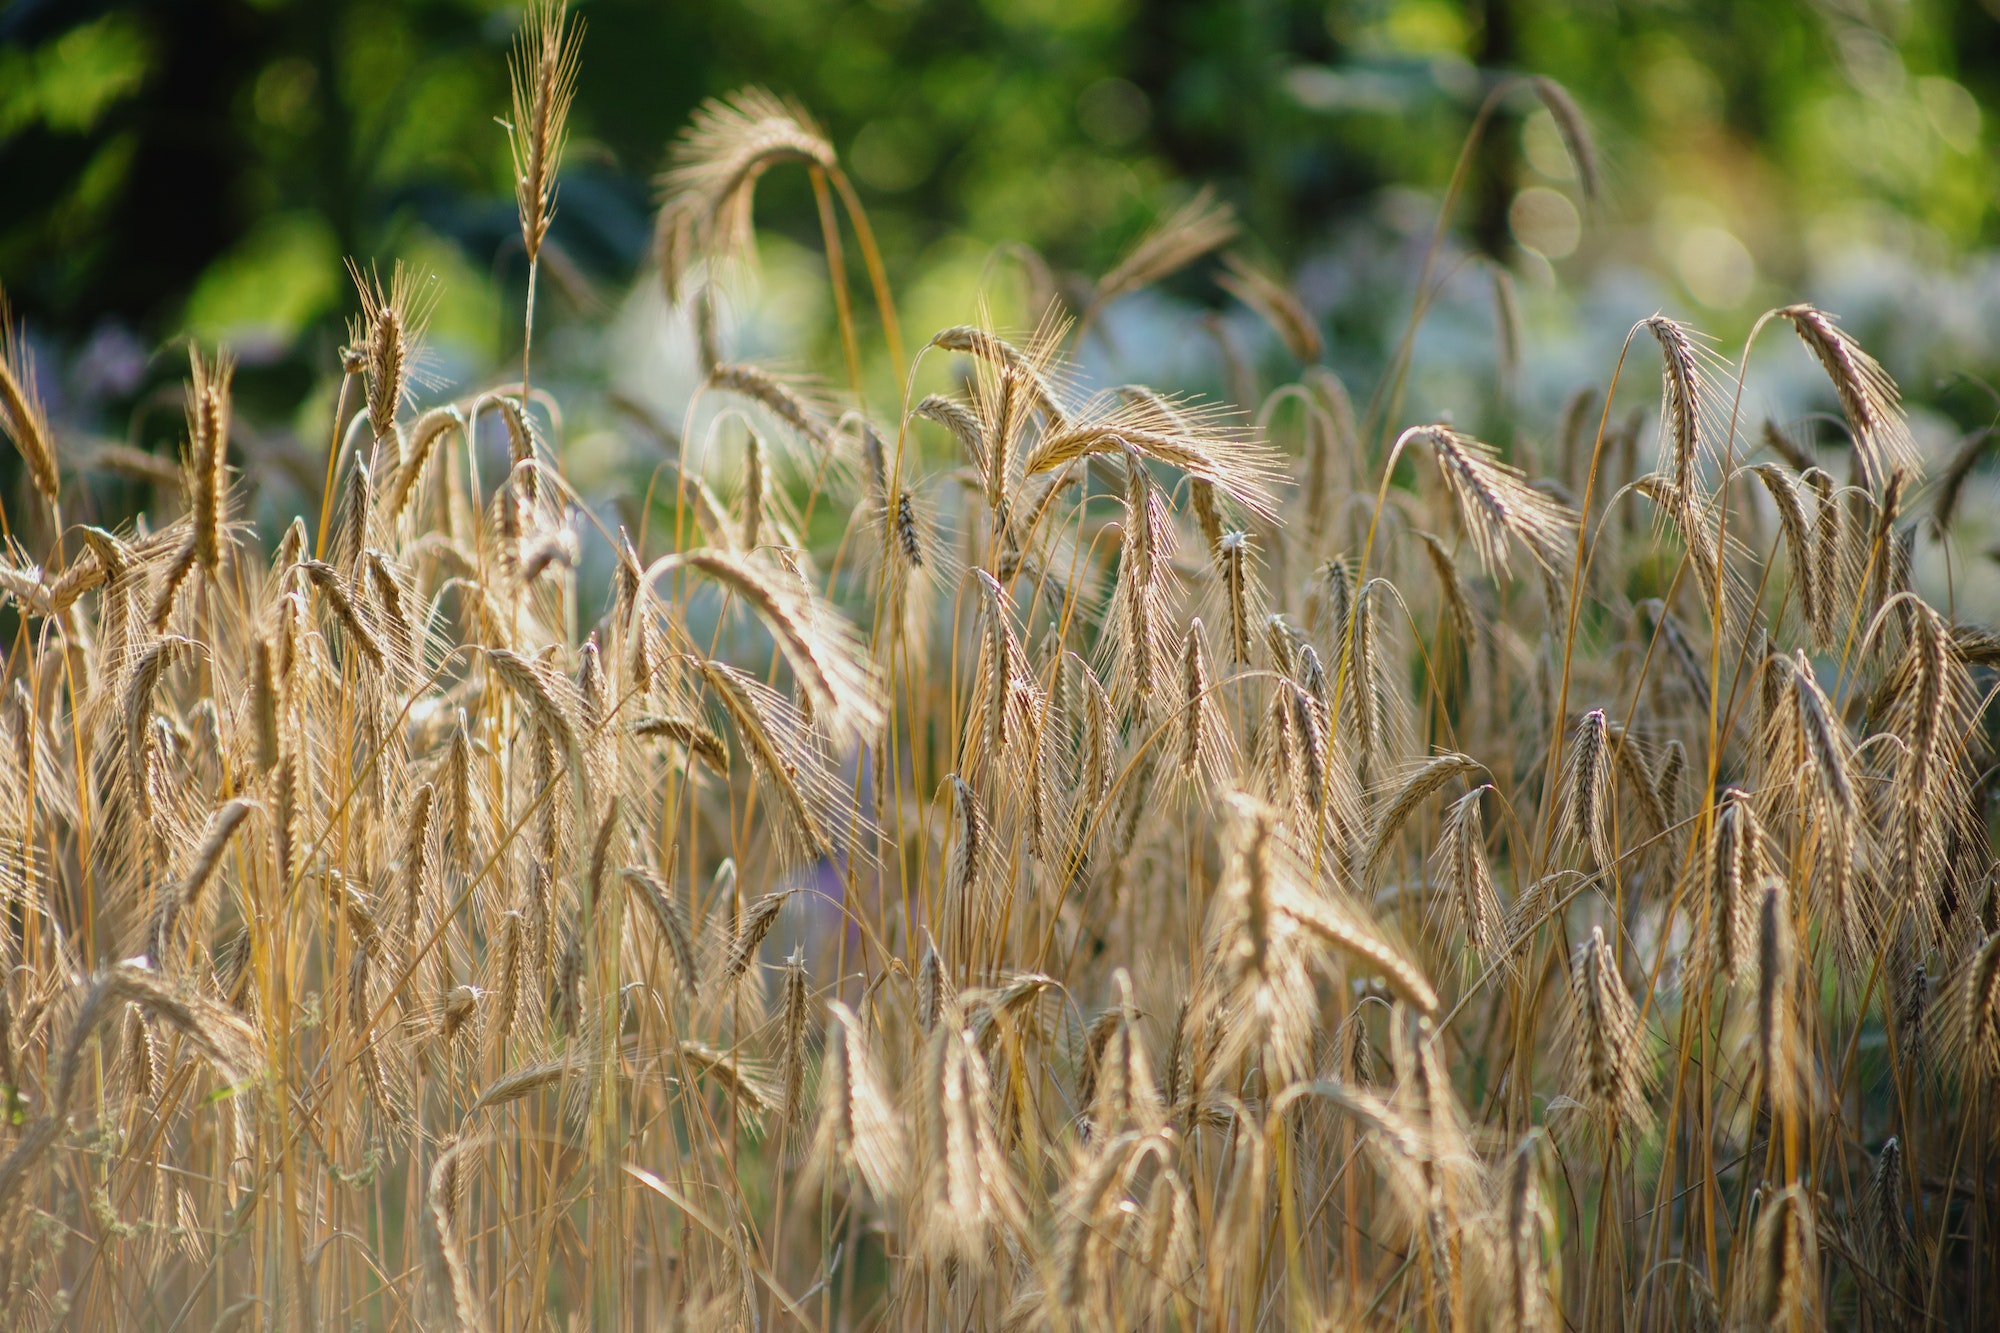 wheat ears grow in farmer's field, grow crops for production of flour and food.